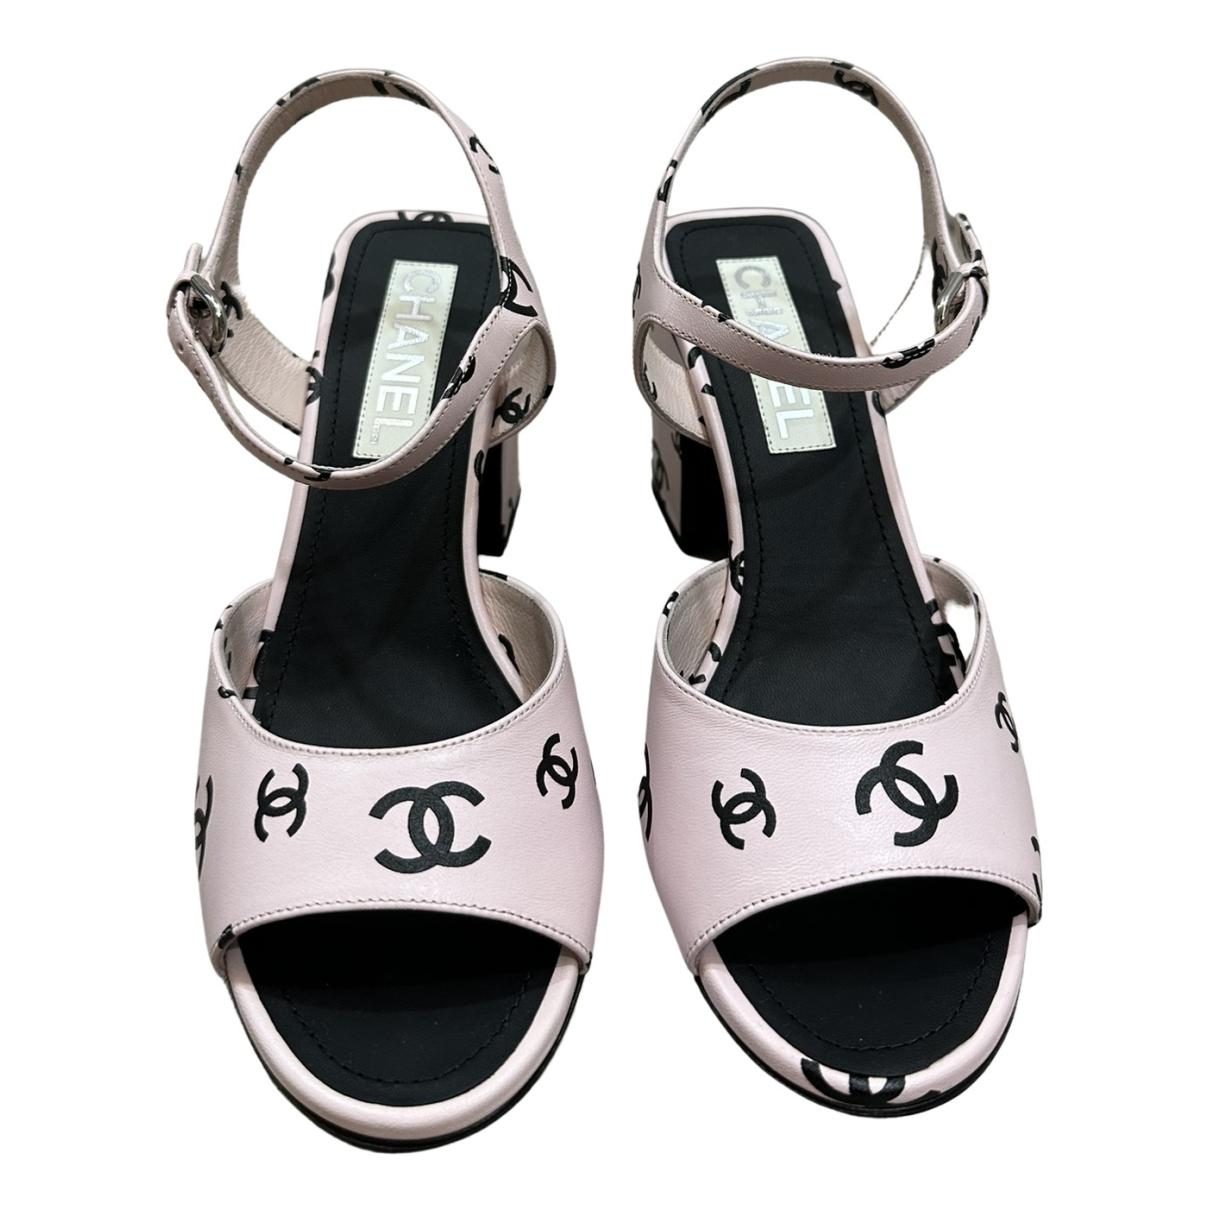 Leather sandals Chanel Black size 41 EU in Leather - 25277124